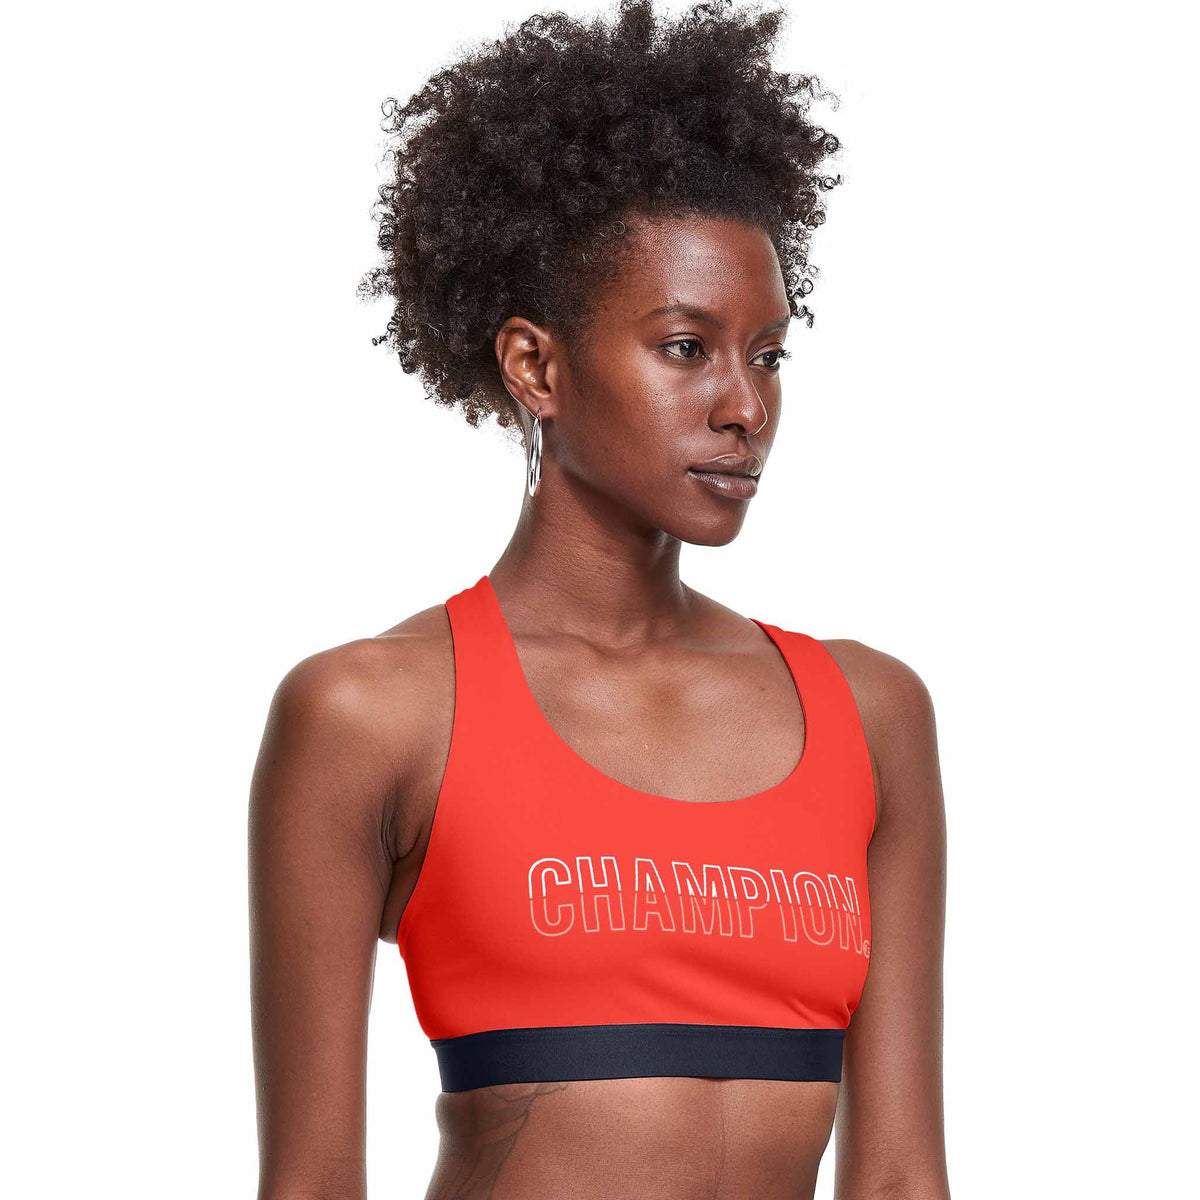 Champion Absolute Eco Sports Bra Graphic Outline Colorblock Logo soutien-gorge sport - Poppy Orange / Athletic Navy - Angle